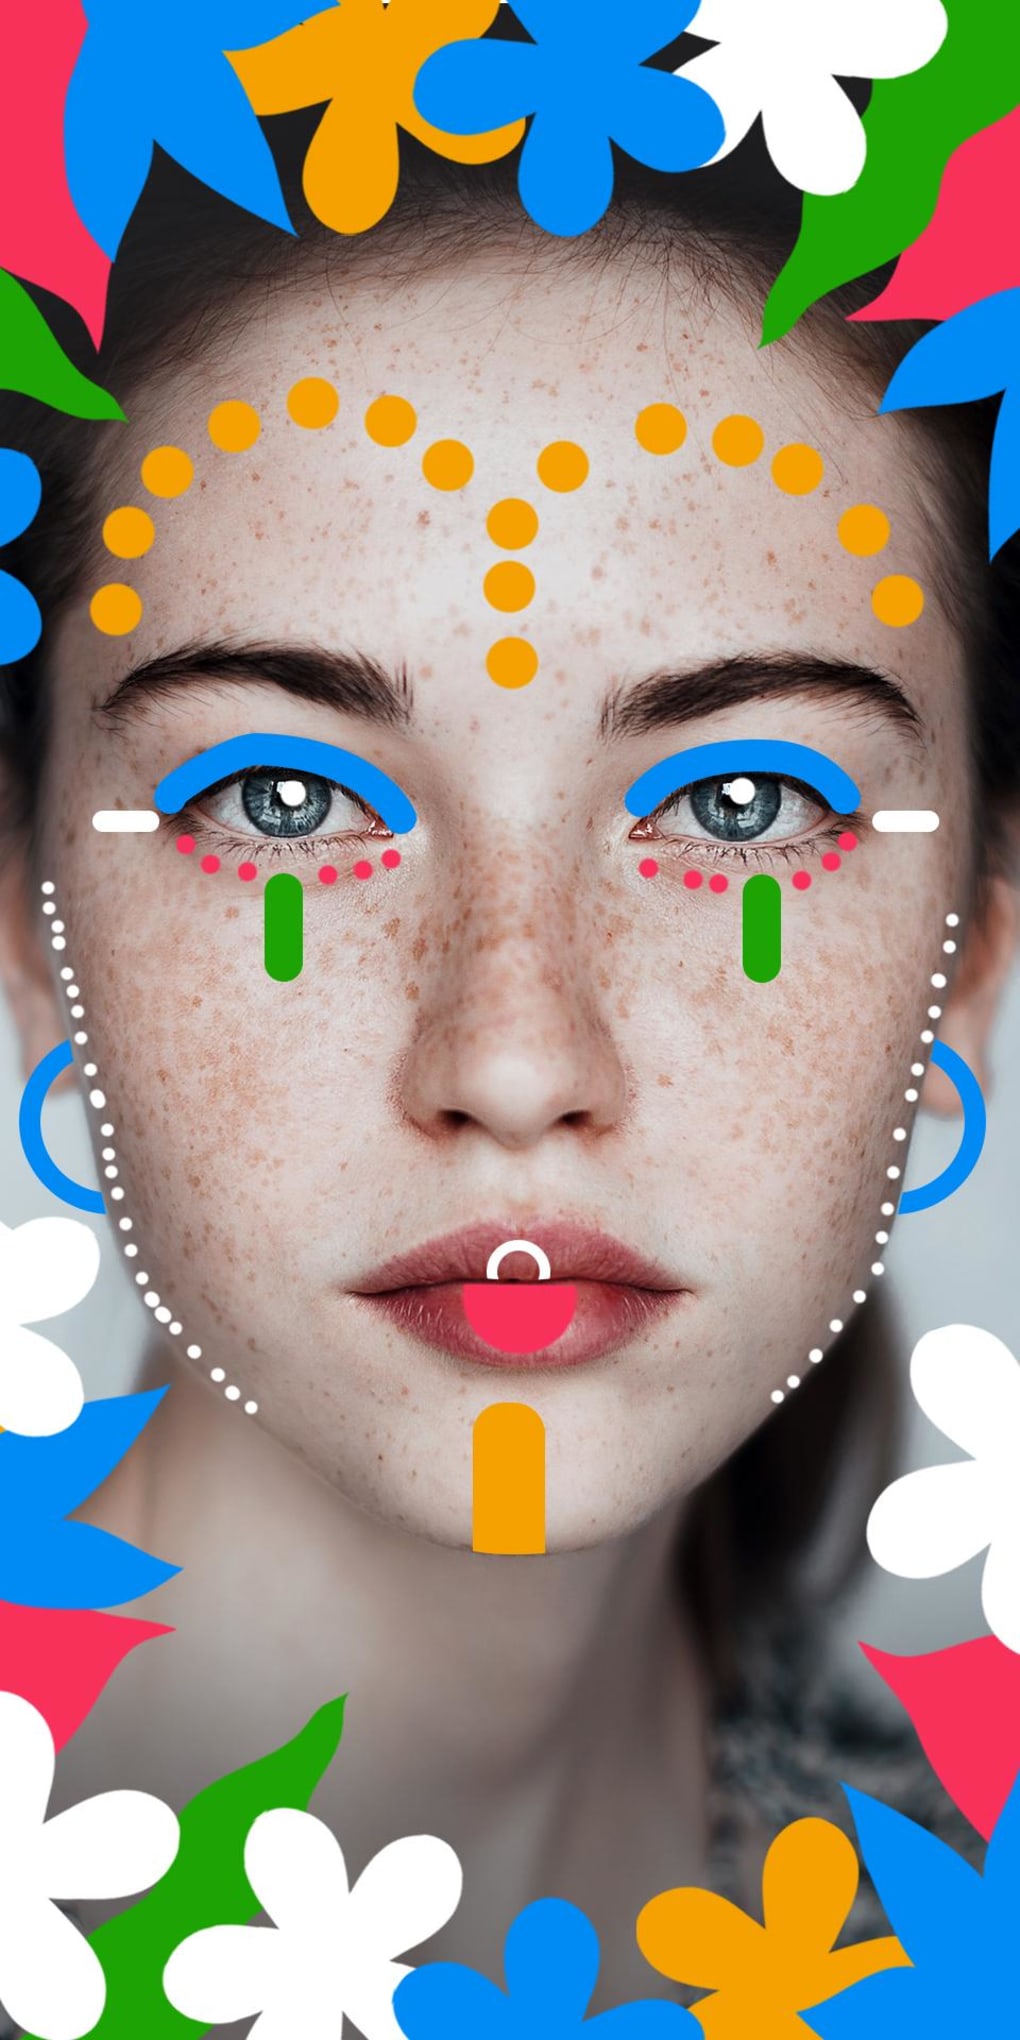 Bazaart: Photo Editor Design APK for Android - Download